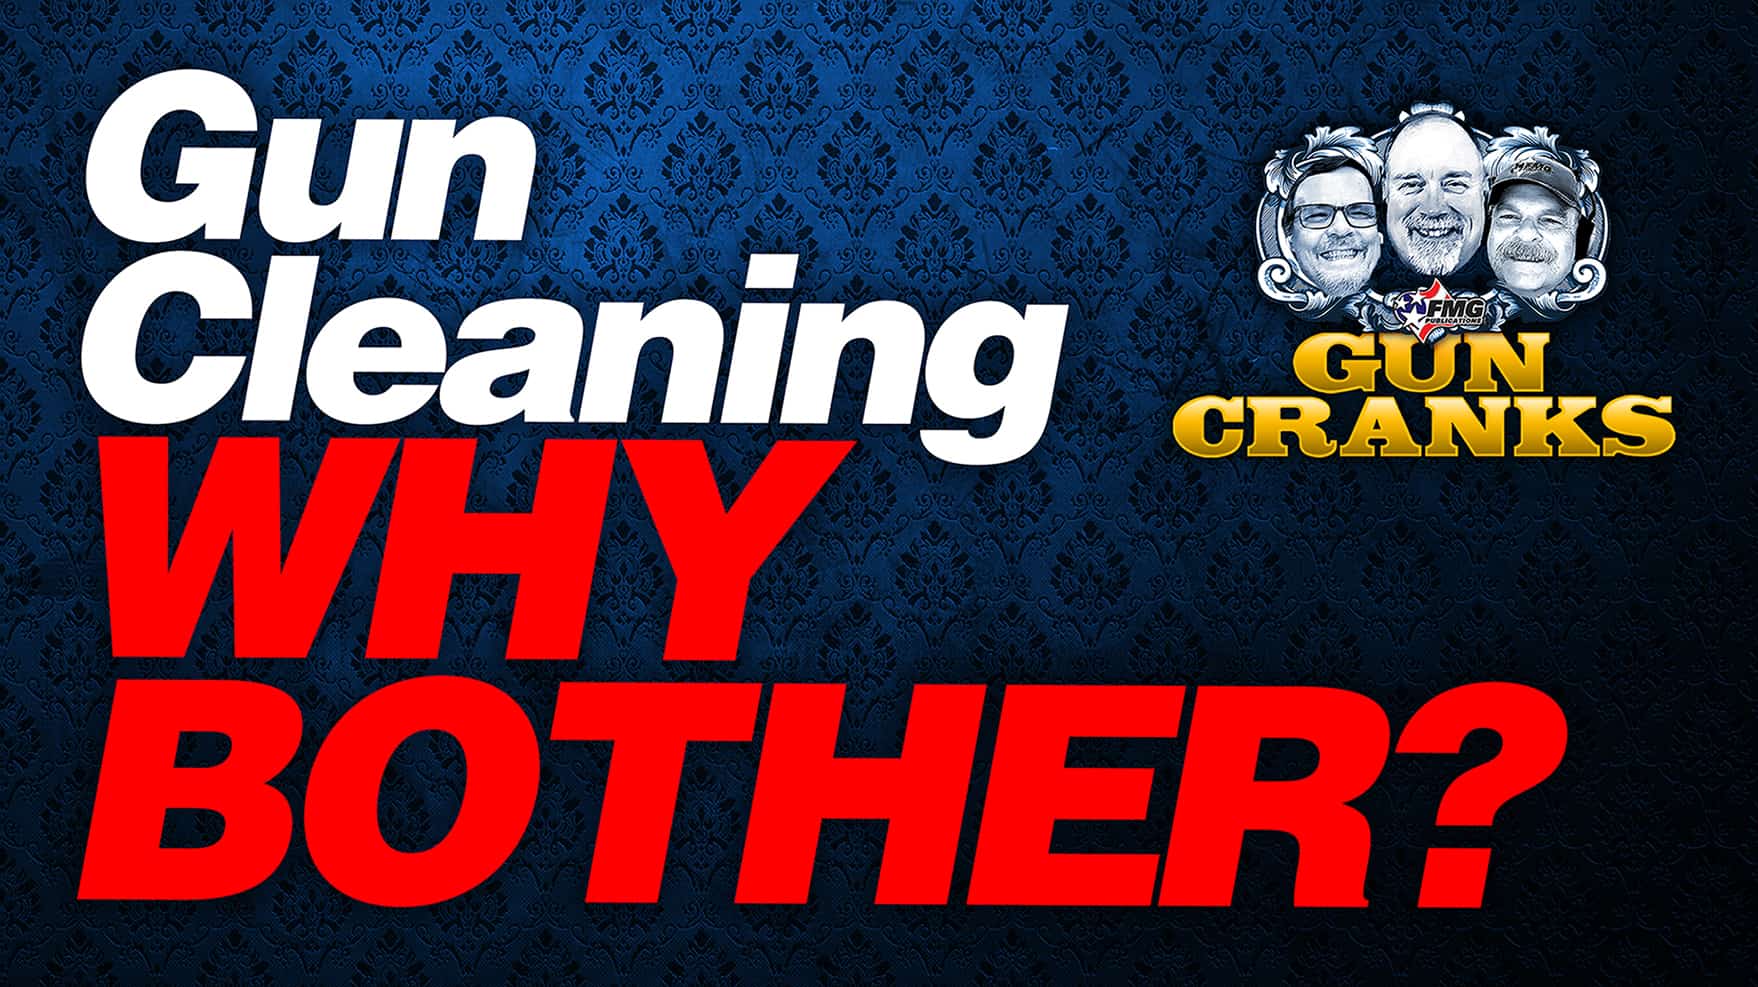 text that reads 'gun cleaning ... why bother?' with the gun cranks logo in the top right corner